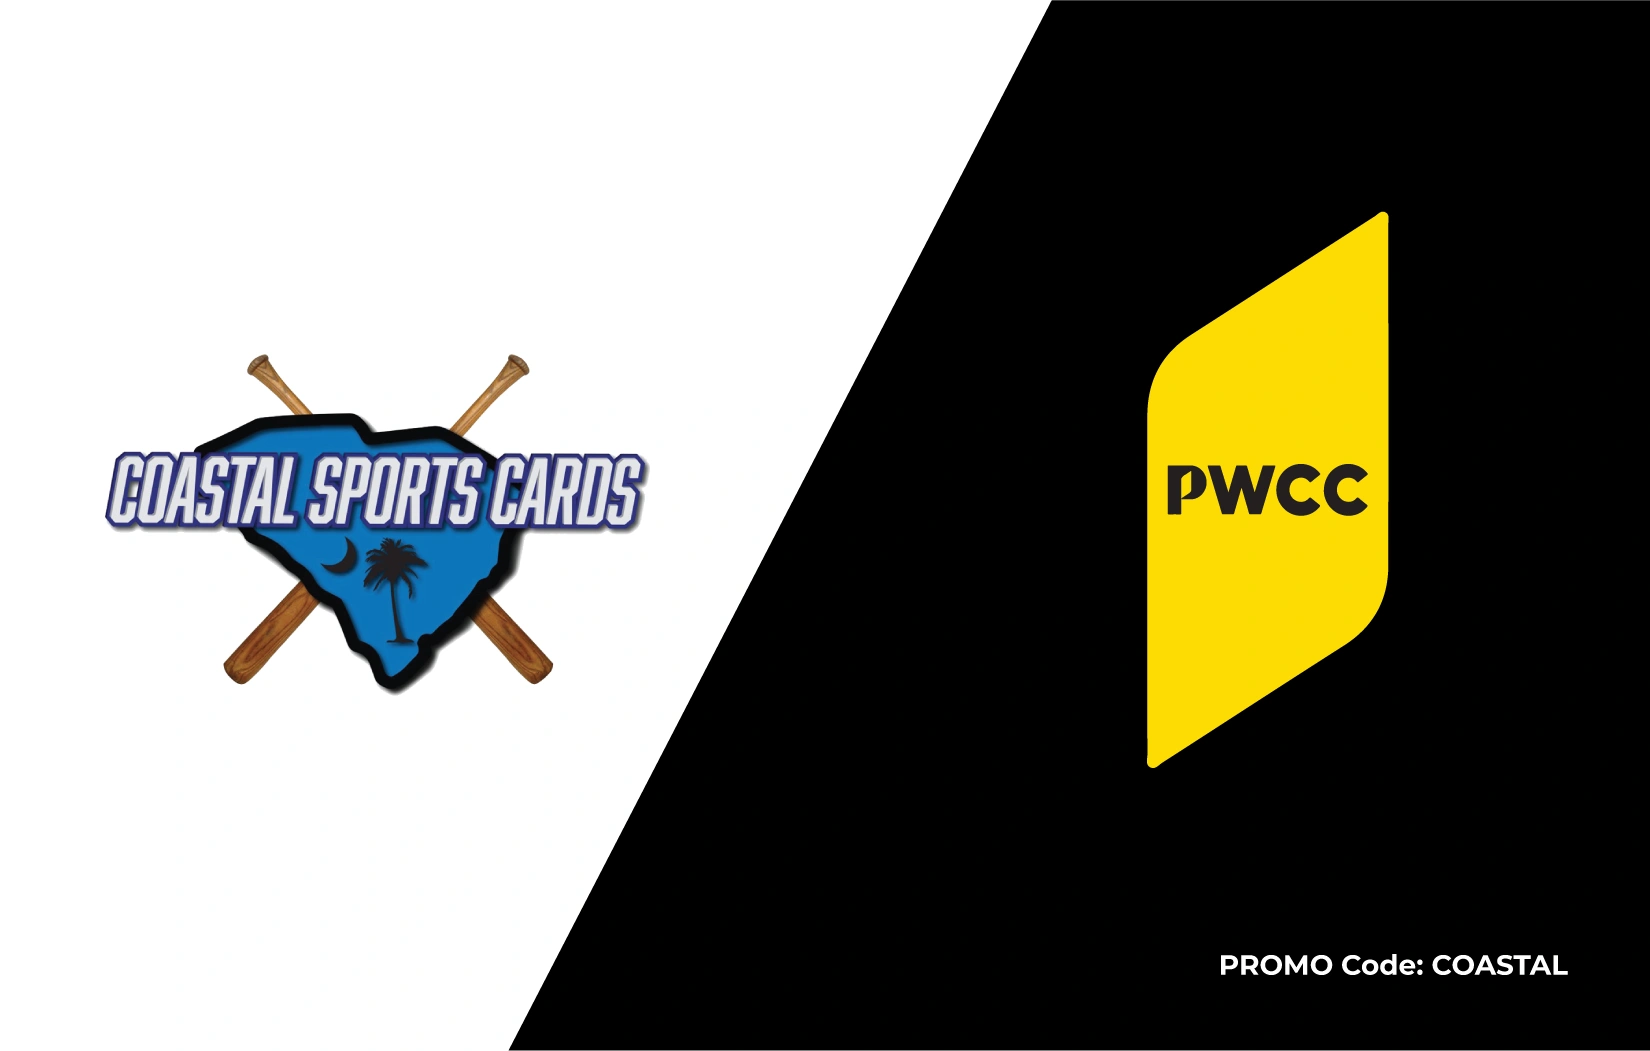 WE ARE PROUD TO ANNOUNCE OUR PARTNERSHIP WITH PWCC